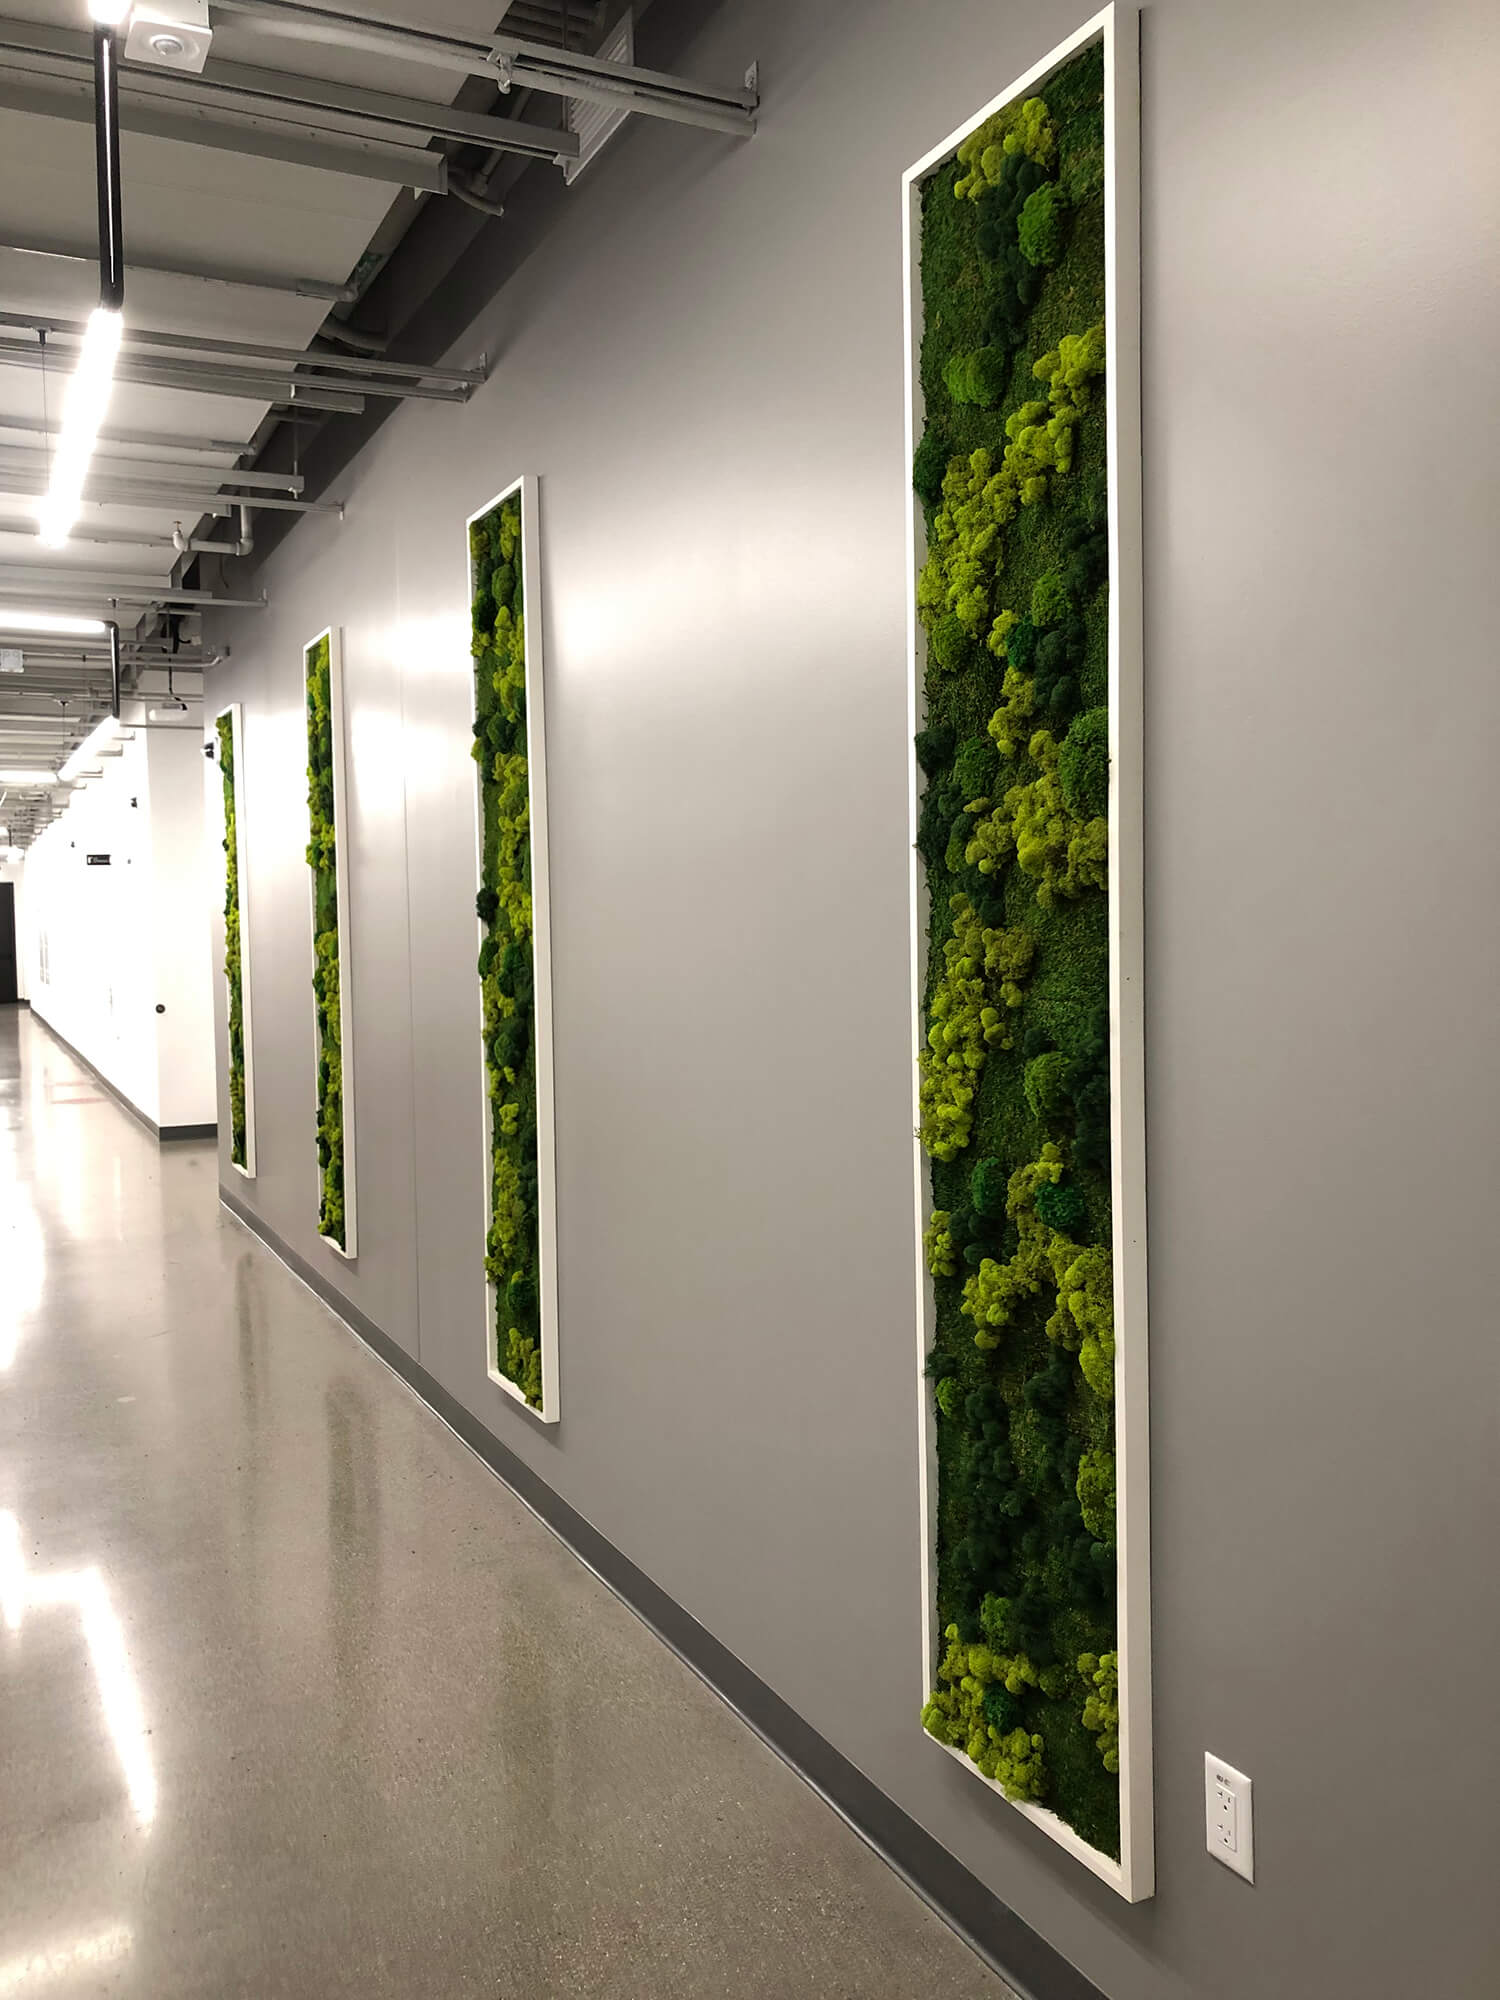 Living wall garden created with a variety of preserved moss; cushion moss, mood moss and pool moss. For eco-friendly interiors.